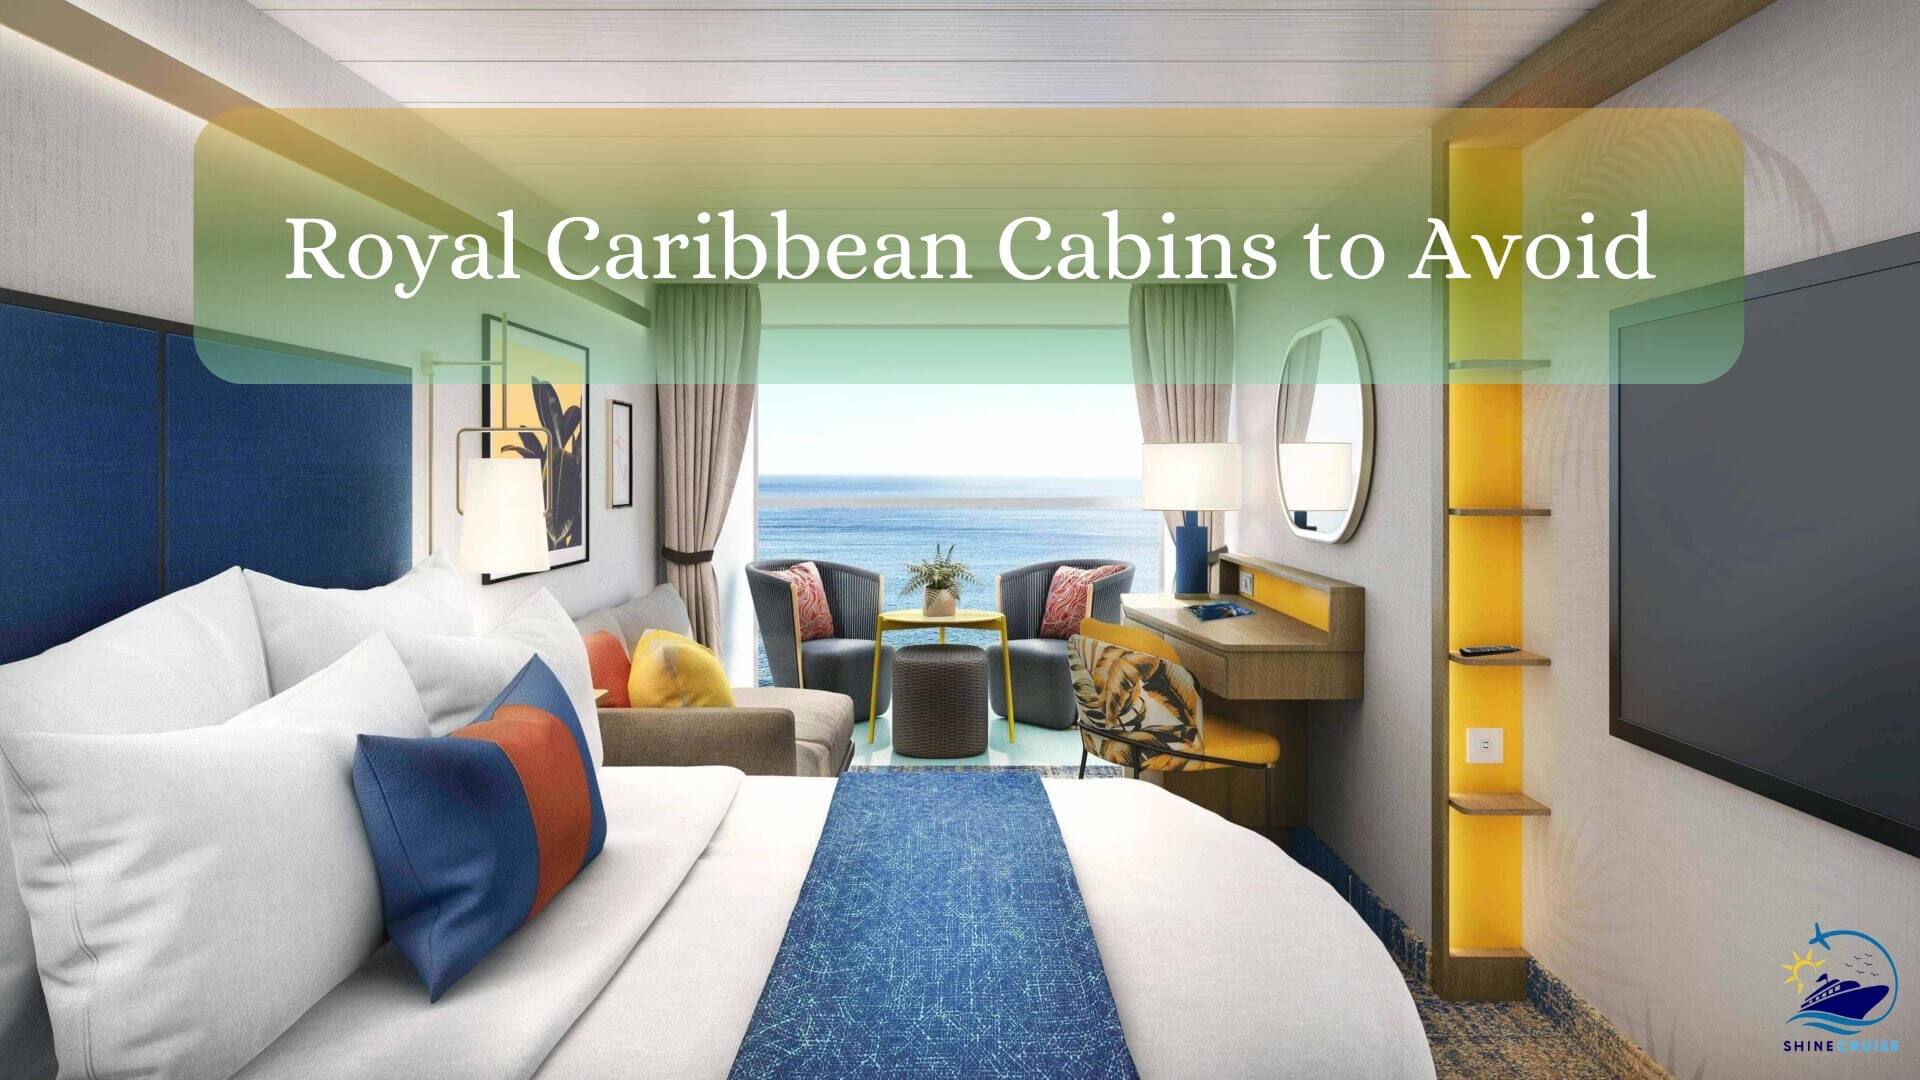 Royal Caribbean Cabins to Avoid